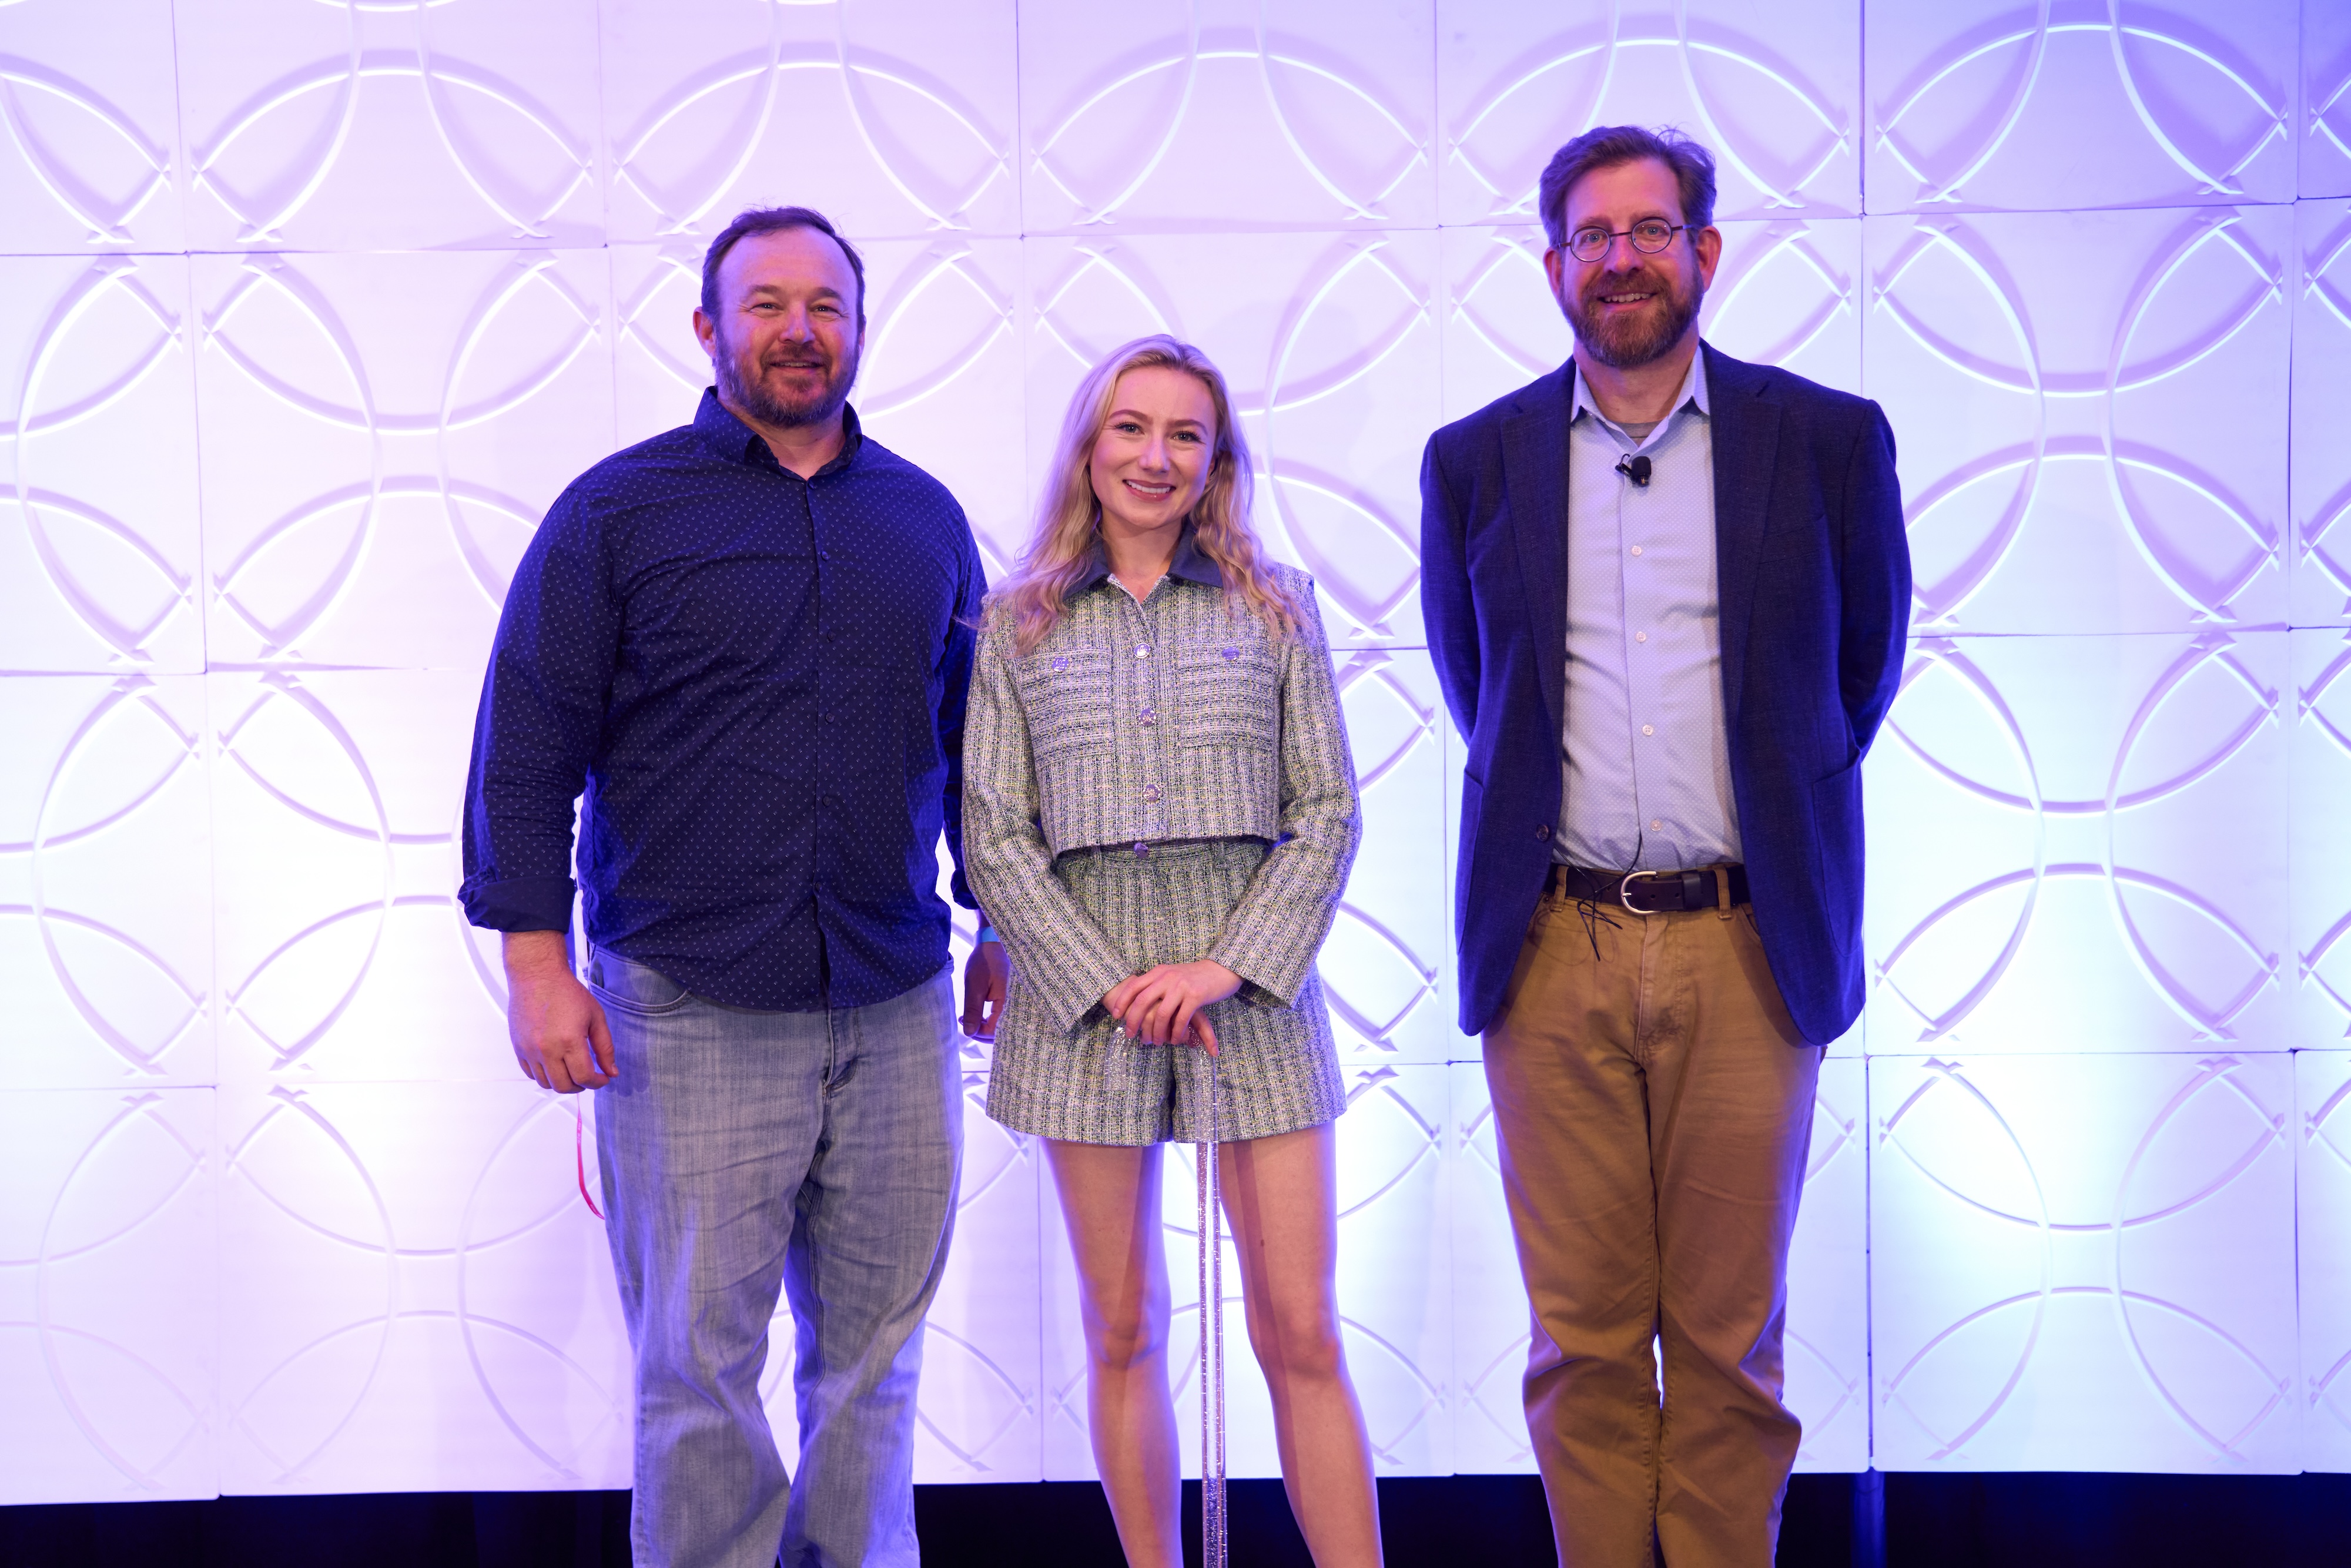 From left to right: Jason Levin (Executive Director of WGU Labs), Keely Cat-Wells (CEO of Making Space), Brad Bernatek (Managing Director of the Accelerator at WGU Labs)